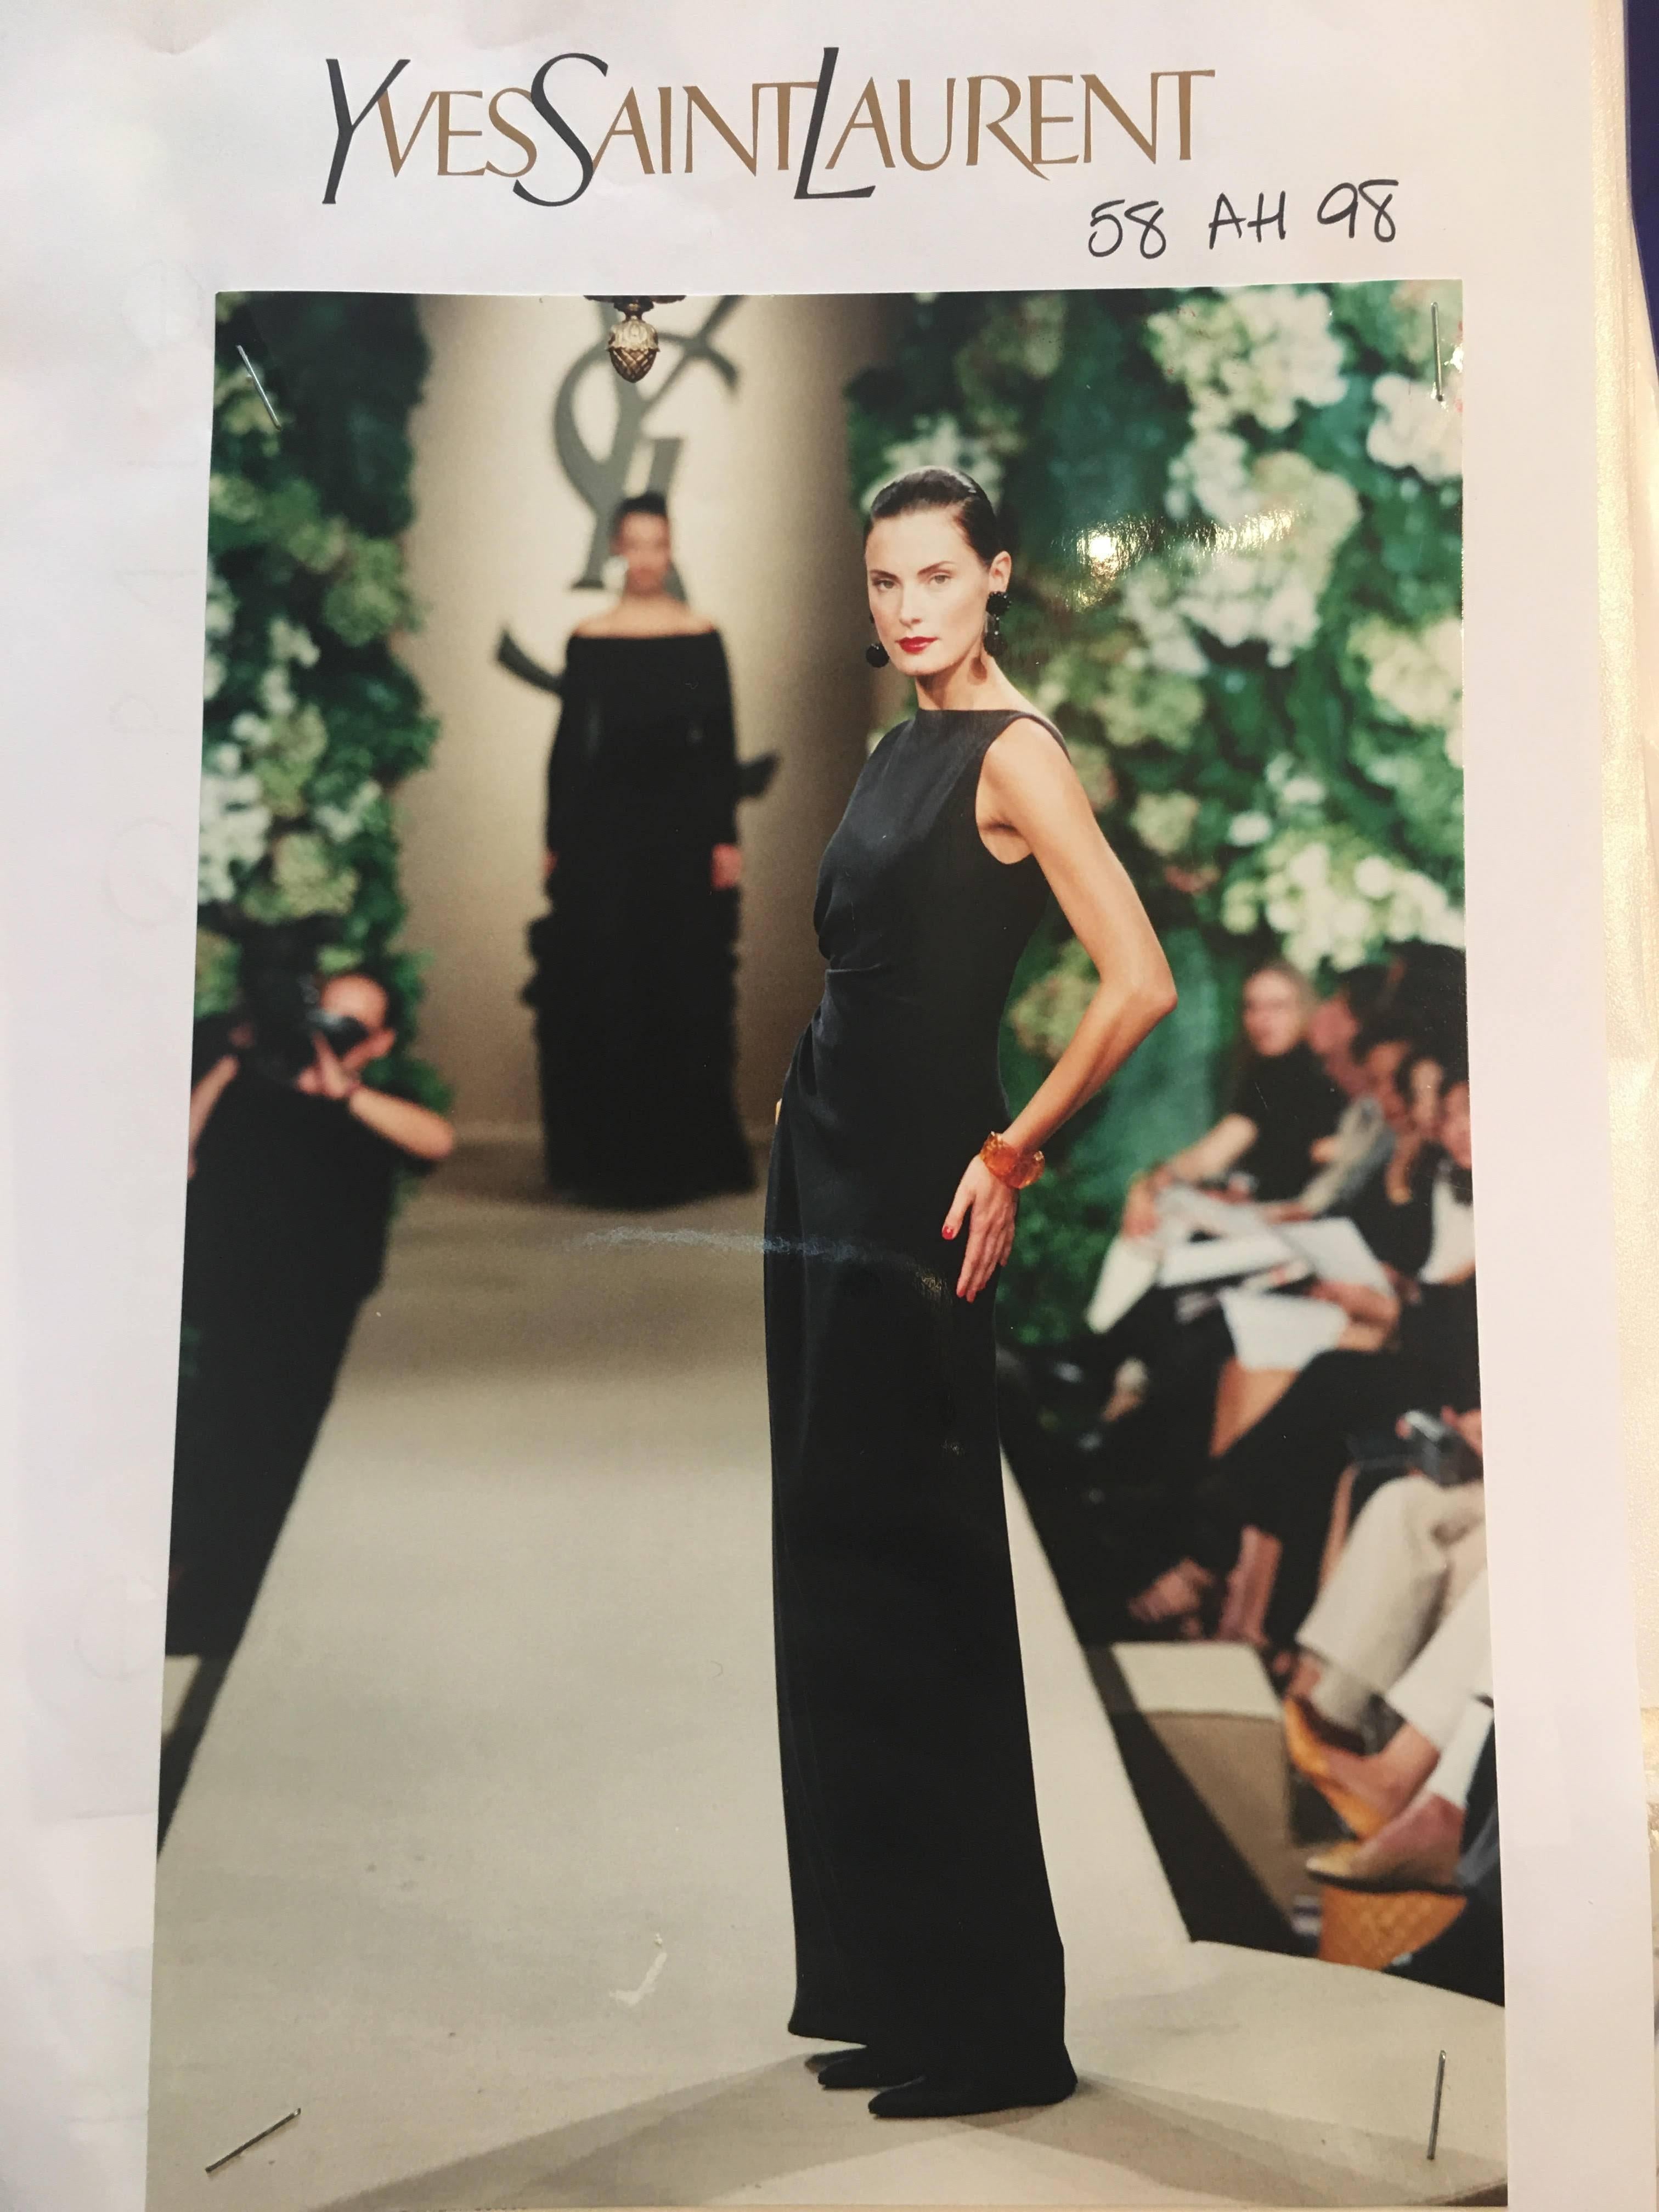 Yves Saint Laurent AW 1998 Haute Couture Black Low Back Evening Gown.   Haute couture archive runway photo included for reference.  Elegant column gown with low back, side bow, and wrap design at back. Fastens with hidden snaps and hook / eye